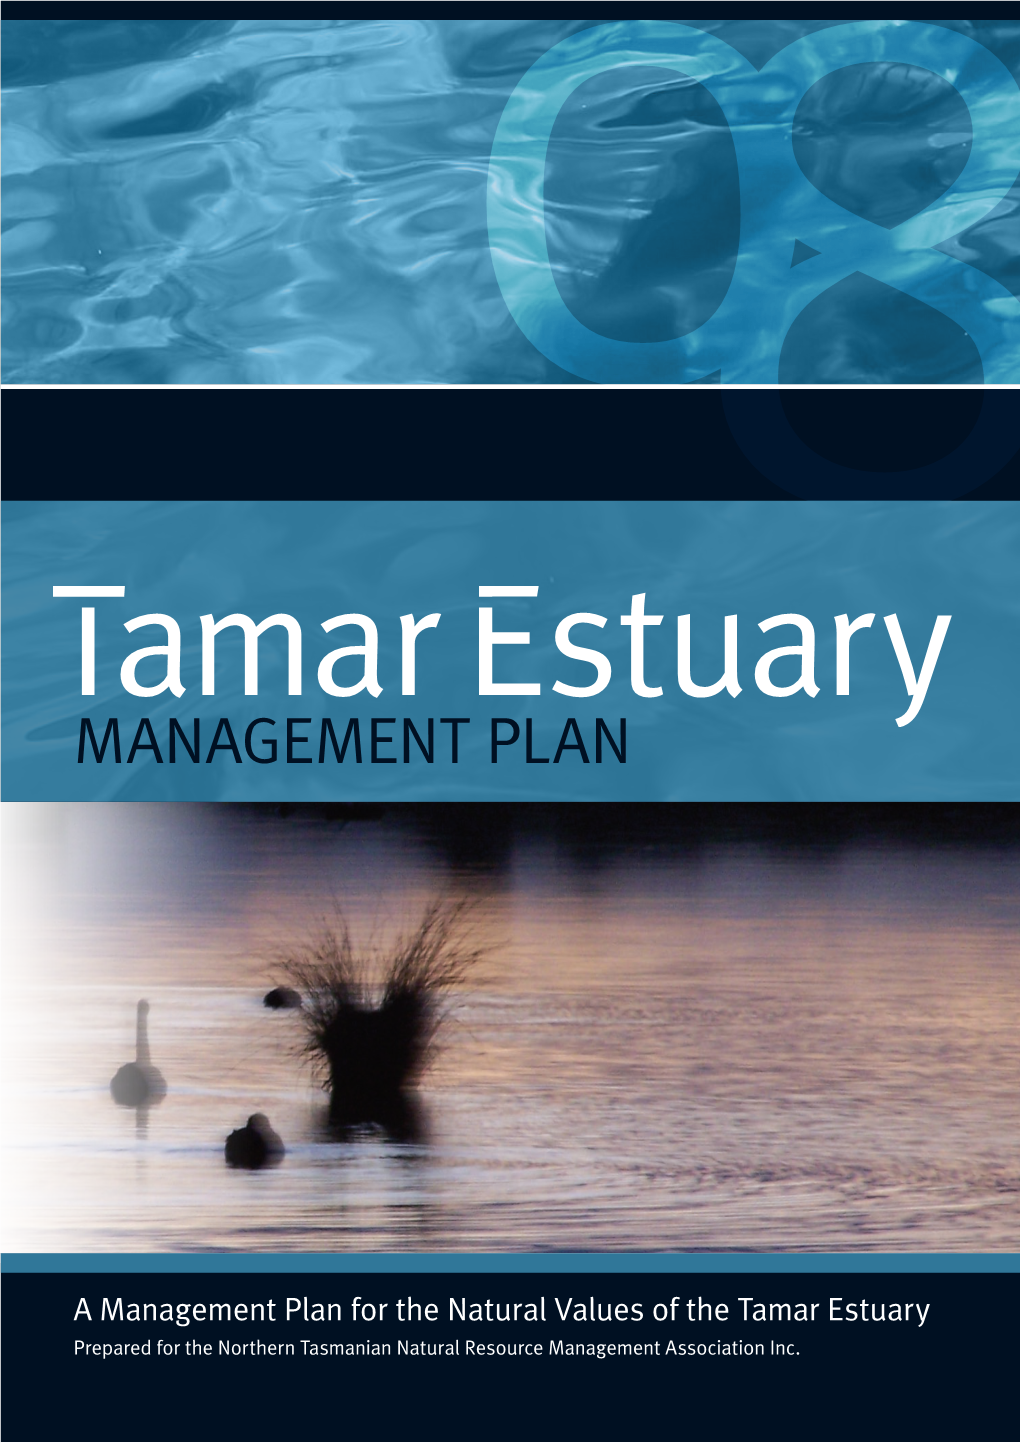 A Management Plan for the Natural Values of the Tamar Estuary Prepared for the Northern Tasmanian Natural Resource Management Association Inc